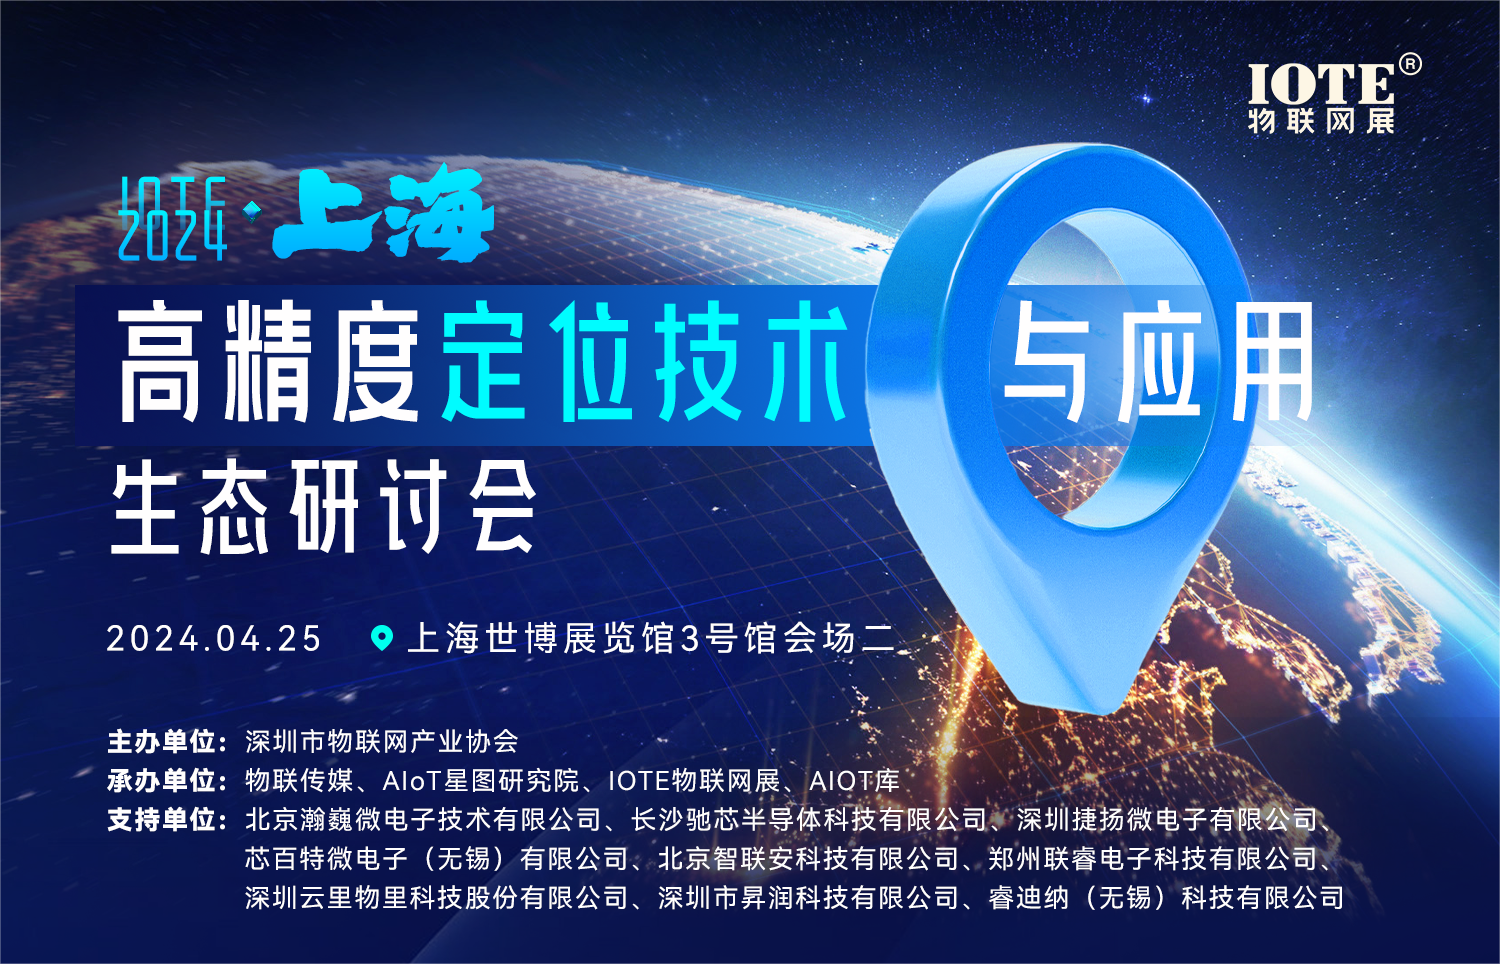 ChixinSemi will attend the "High Precision Positioning Tech and Application Ecology Seminar" to explore the road to innovation of domestic UWB chips